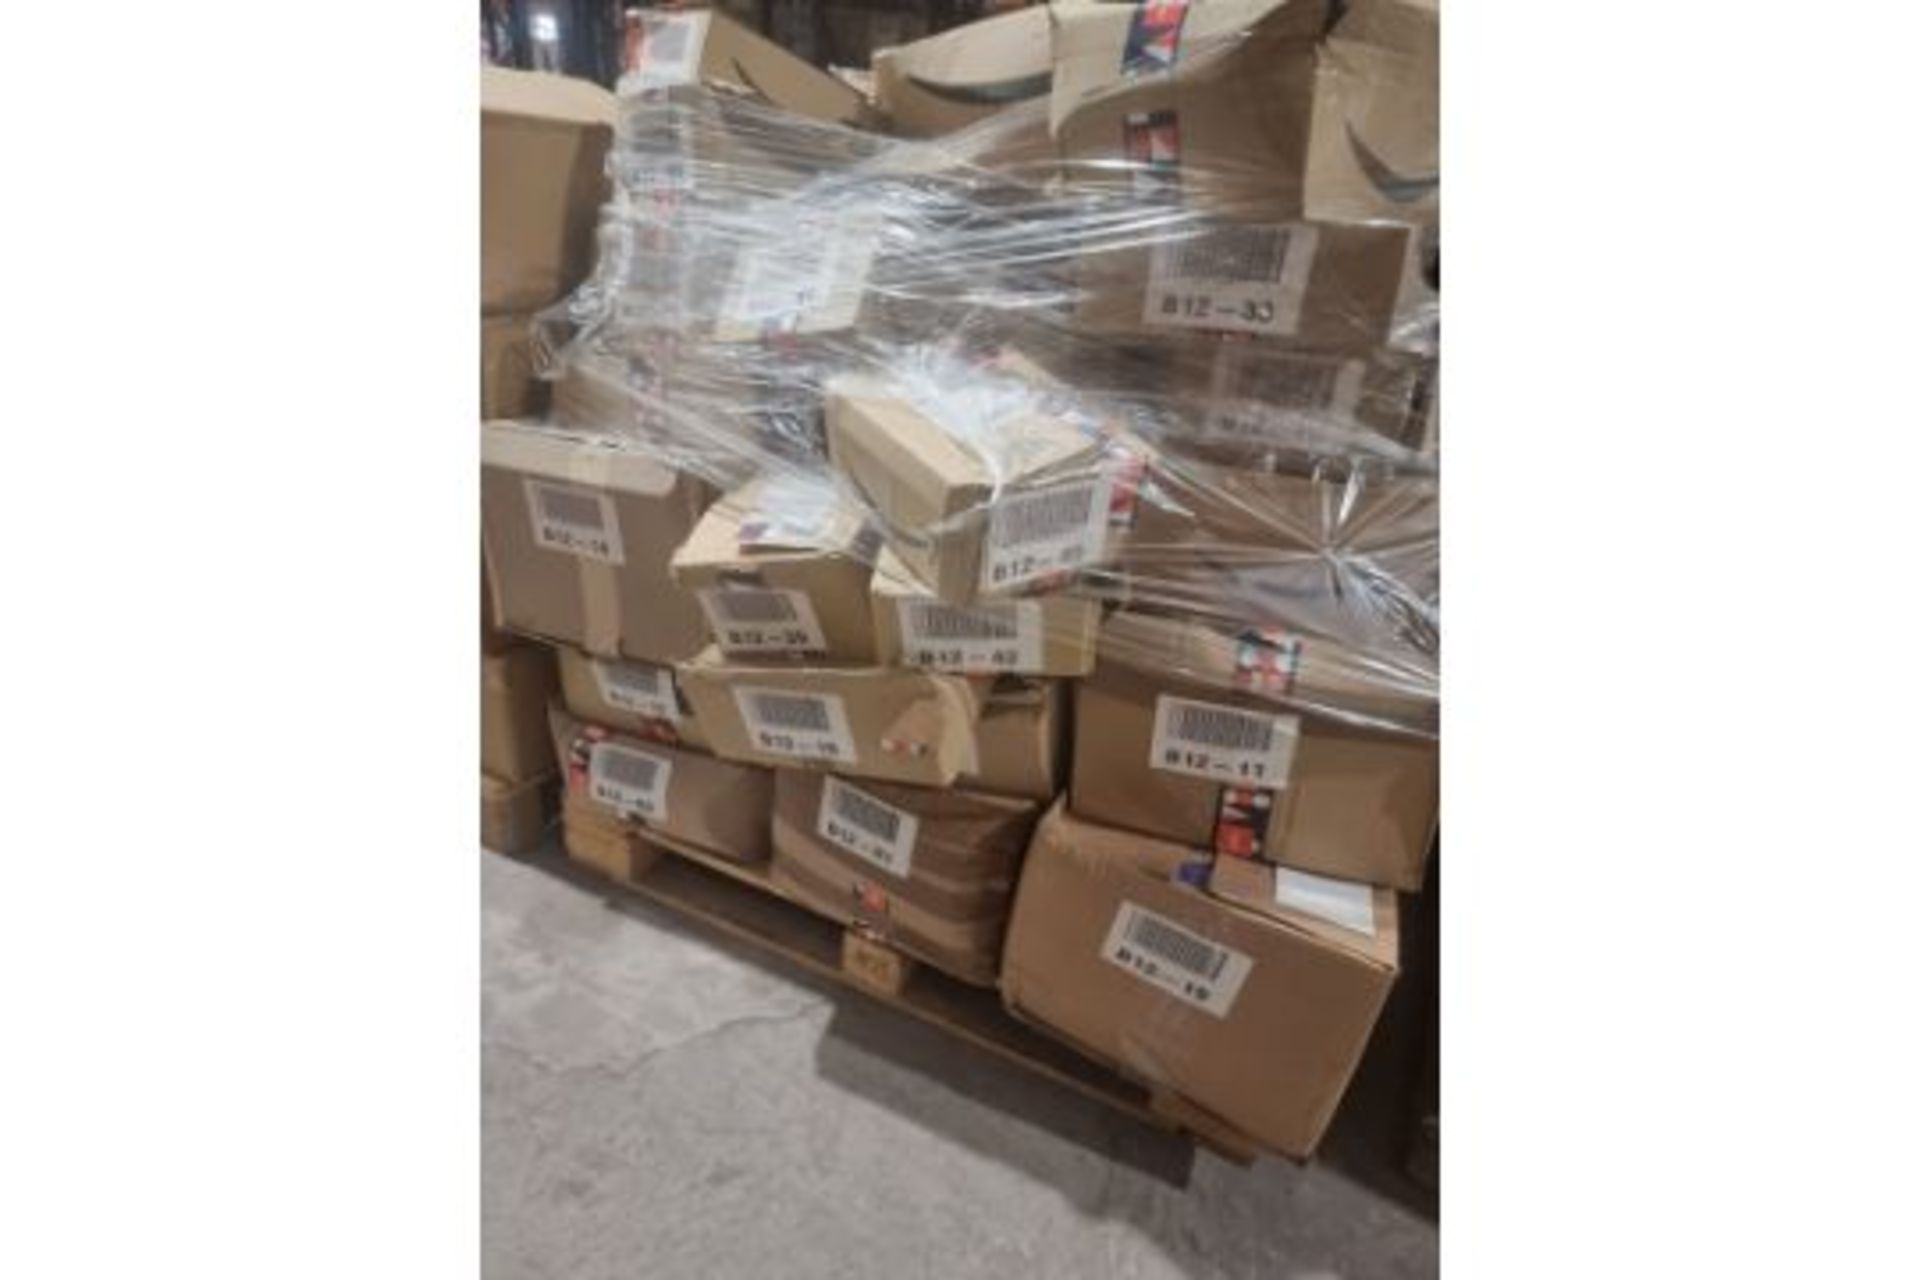 TRADE LOT TO CONTAIN 100 x MIXED BRAND NEW AMAZON OVERSTOCK ITEMS. ITEMS ARE PICKED RANDOMLY FROM - Image 26 of 29